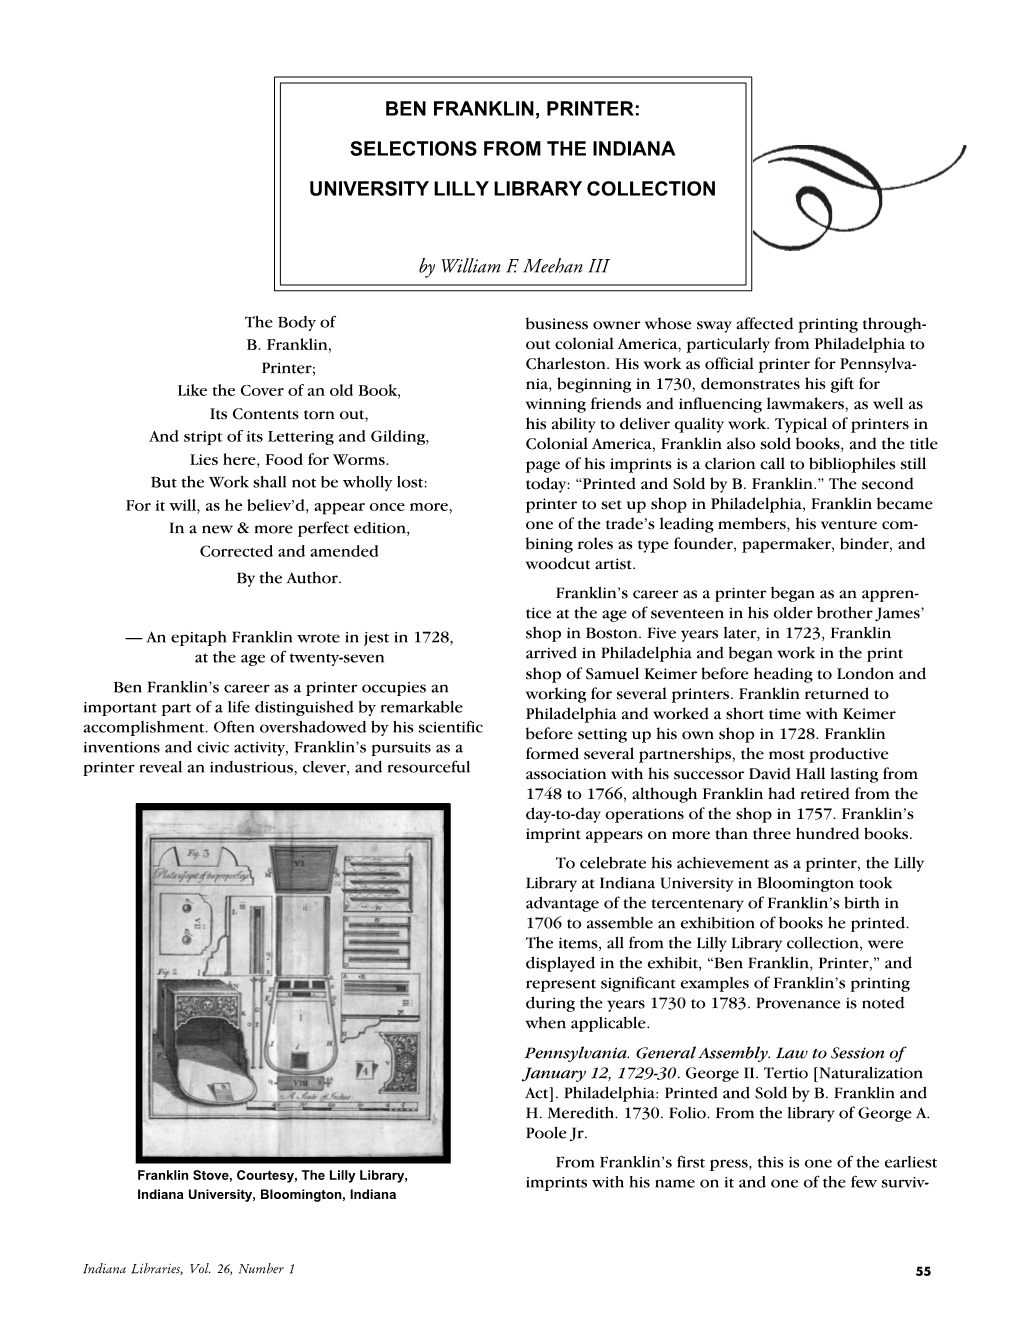 Ben Franklin, Printer: Selections from the Indiana University Lilly Library Collection